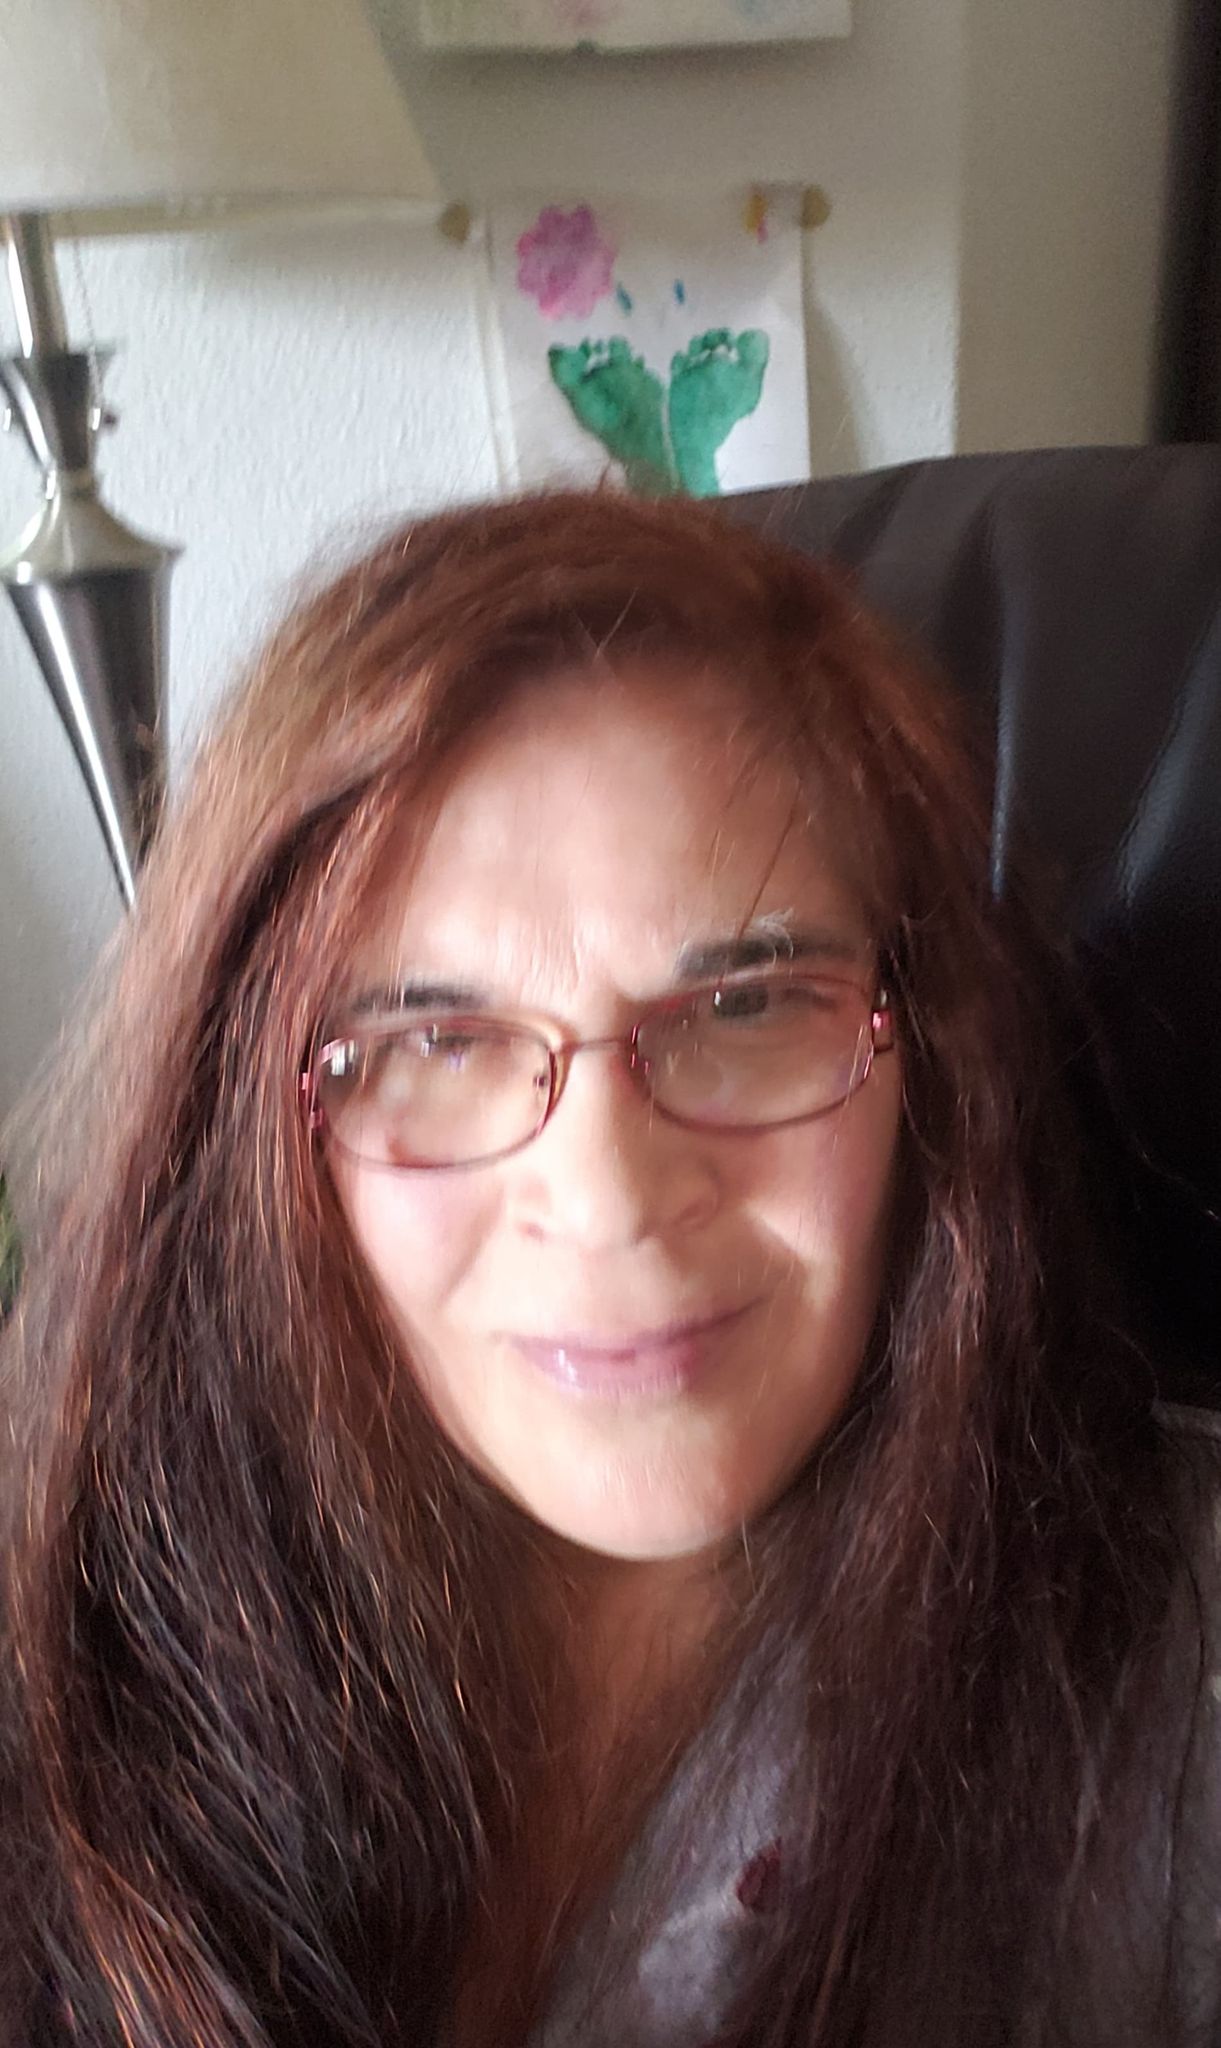 A photo of a woman with long brown hair and glasses